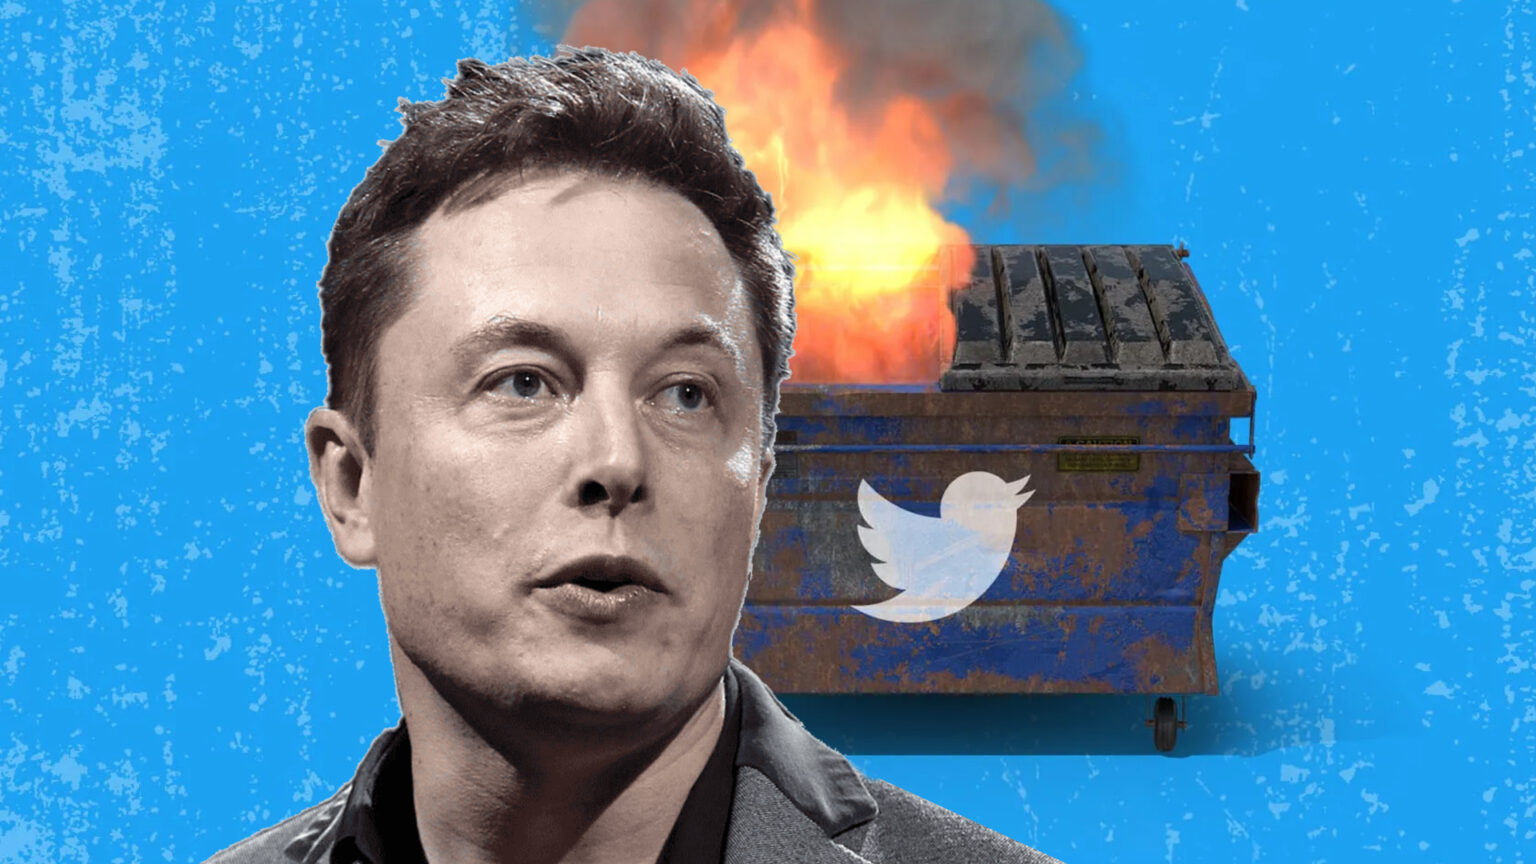 Elon Musk S Tenure As The Custodian Of Twitter Has Been The Complete